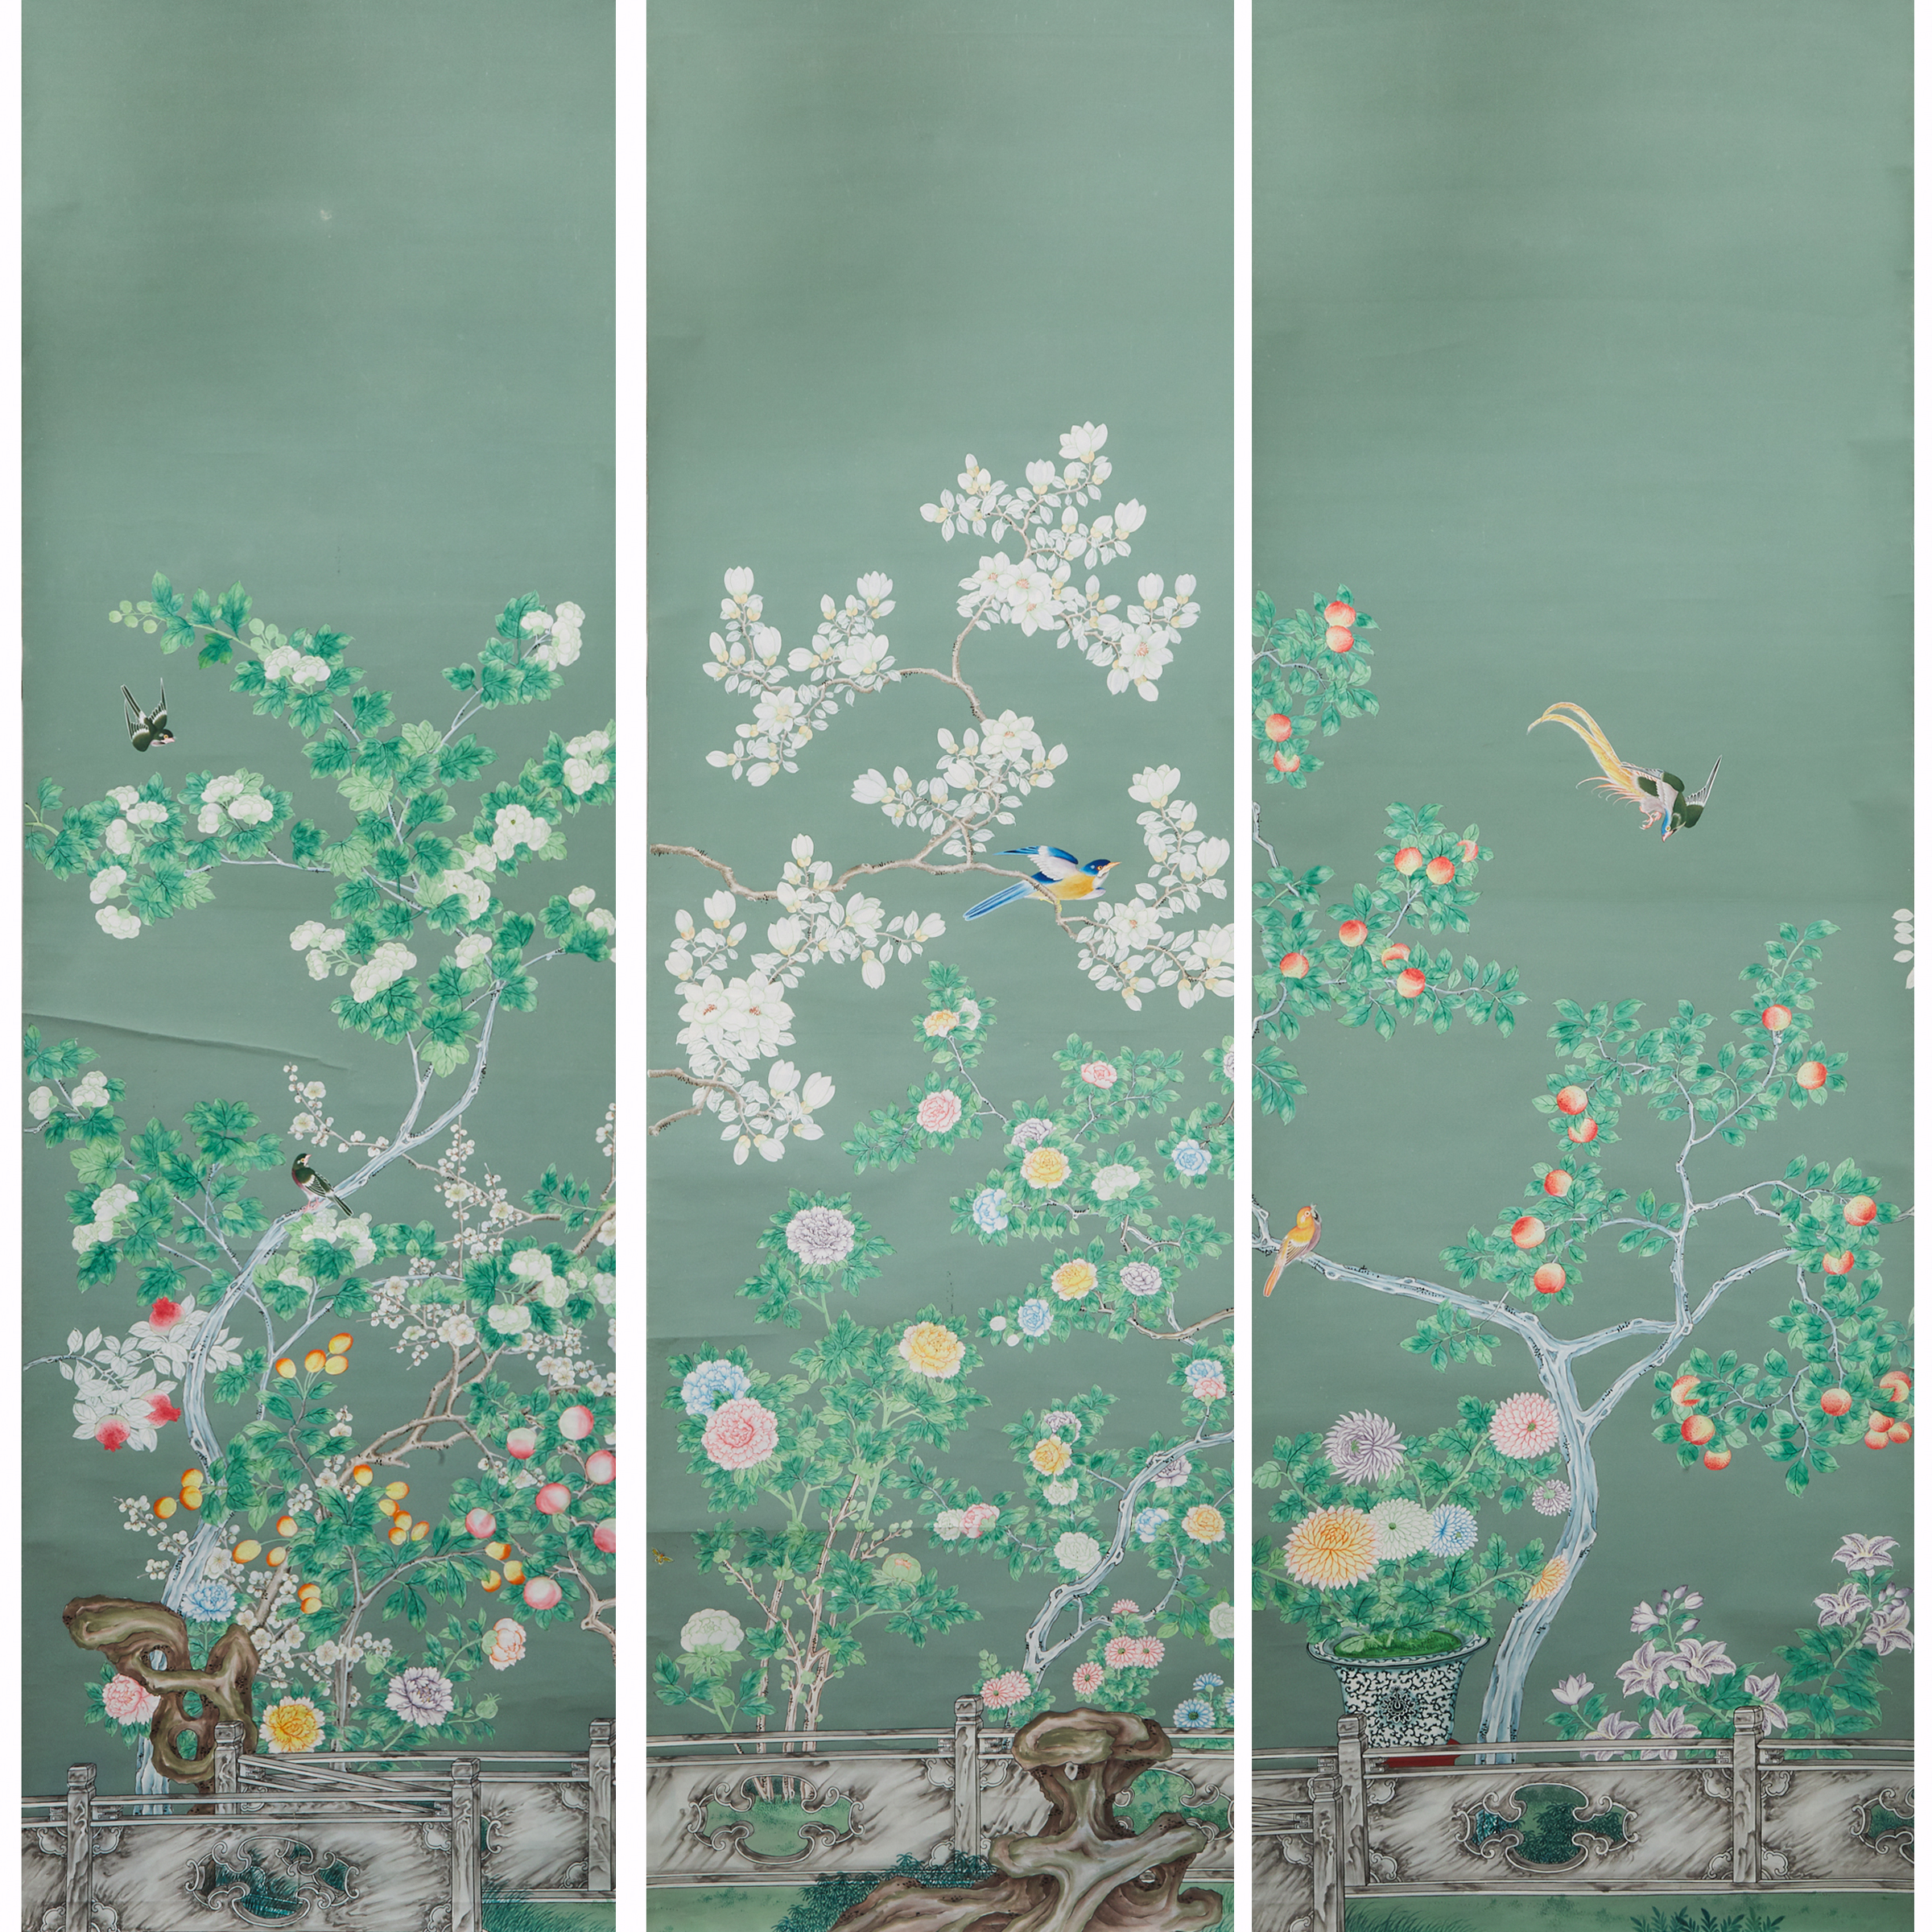 A Set of Three Chinese Export Wallpaper Panels, Early 20th Century